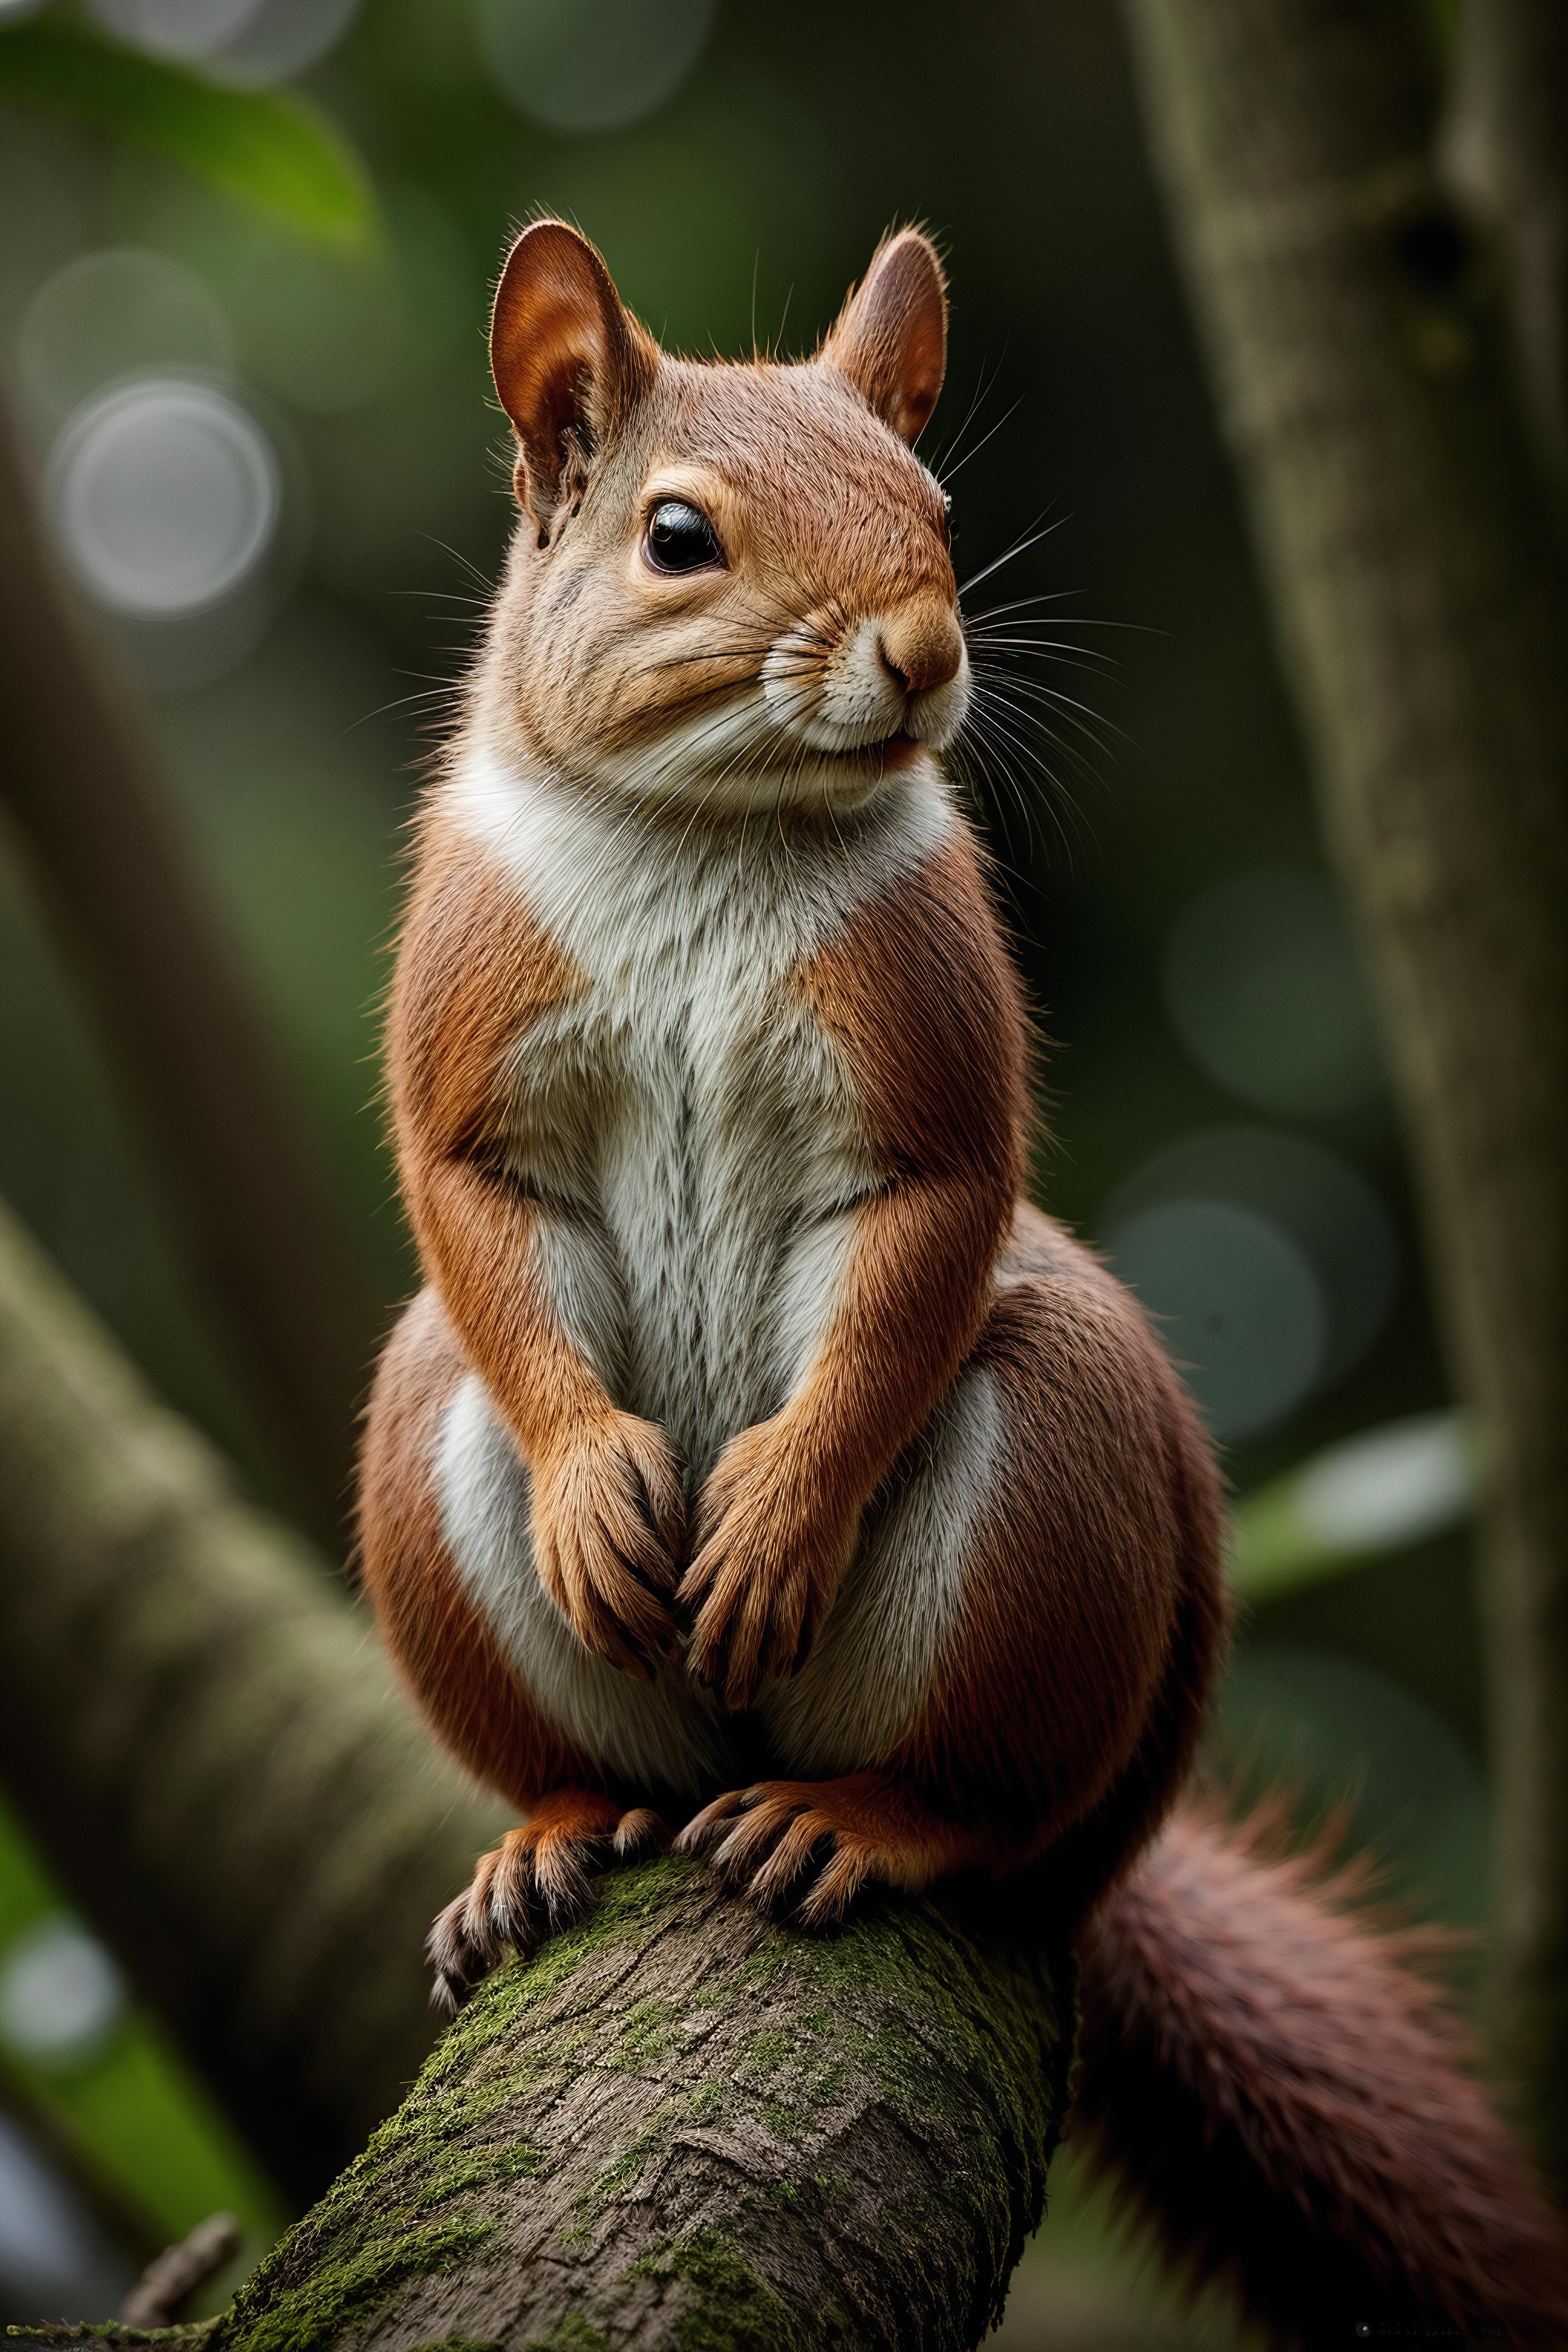 A small brown squirrel sitting on a tree branch.